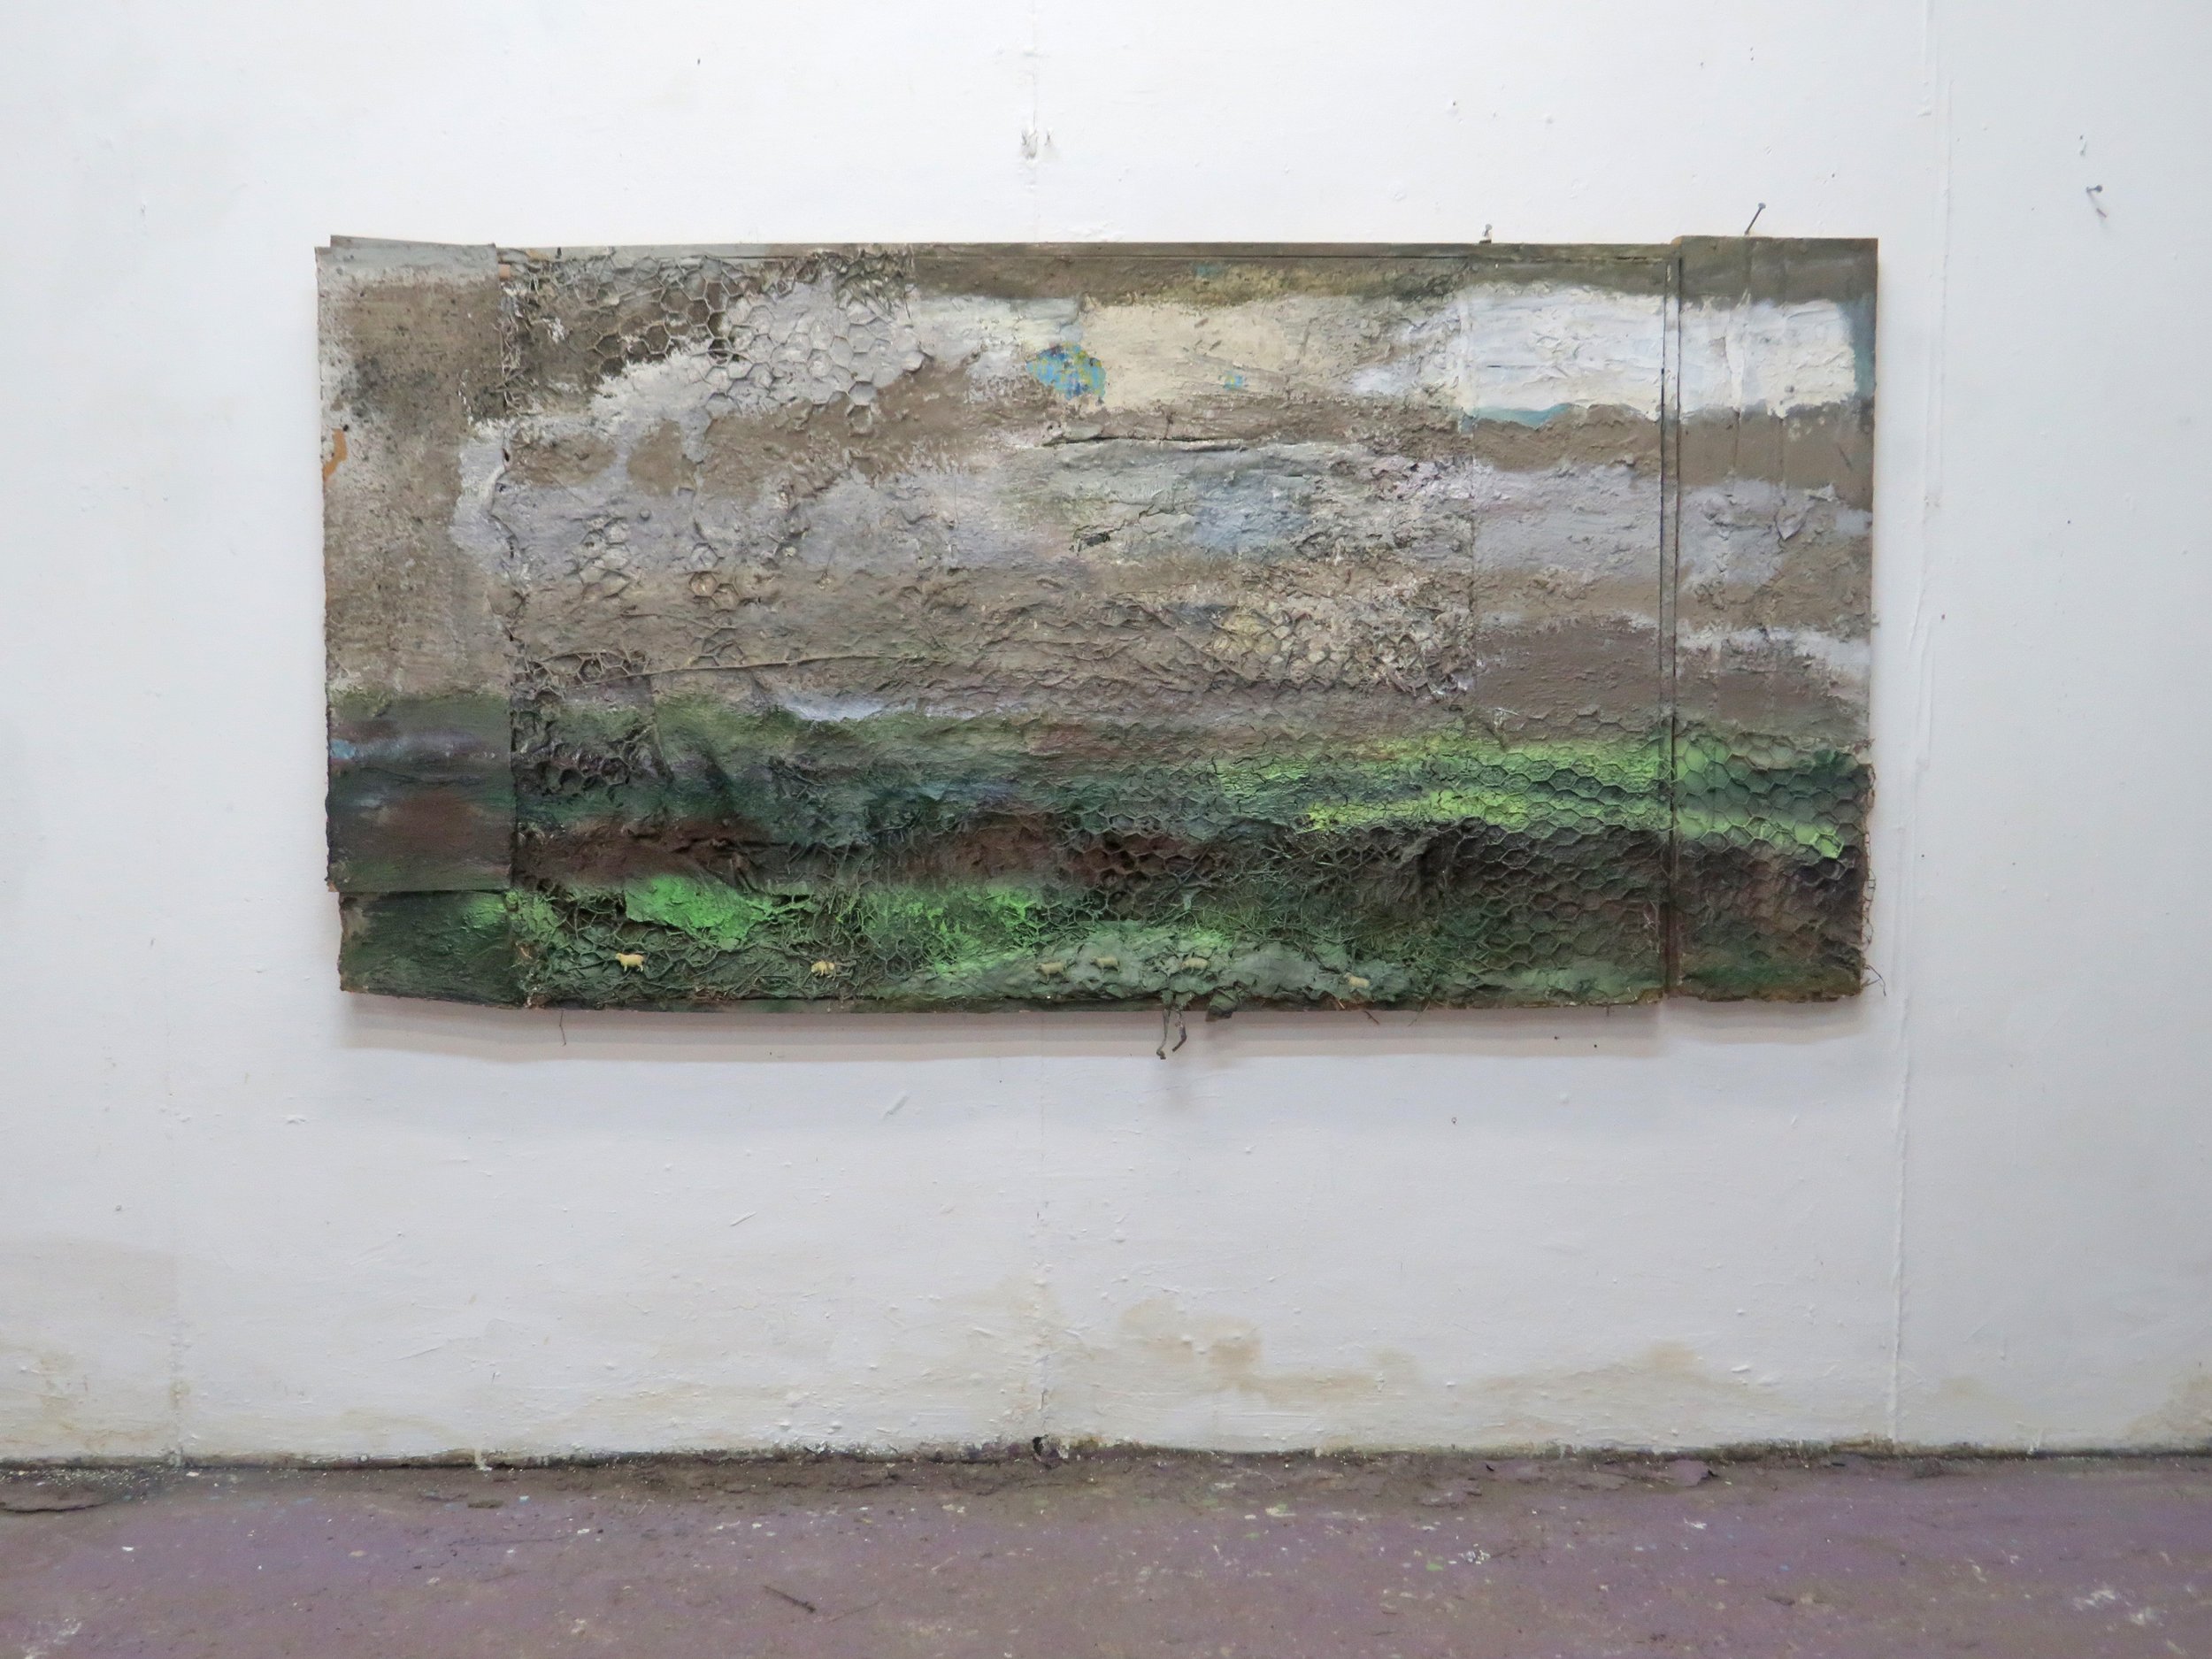 Studio View of Summer, Green Wilderness and Lost Sheep 106 x 210 cms